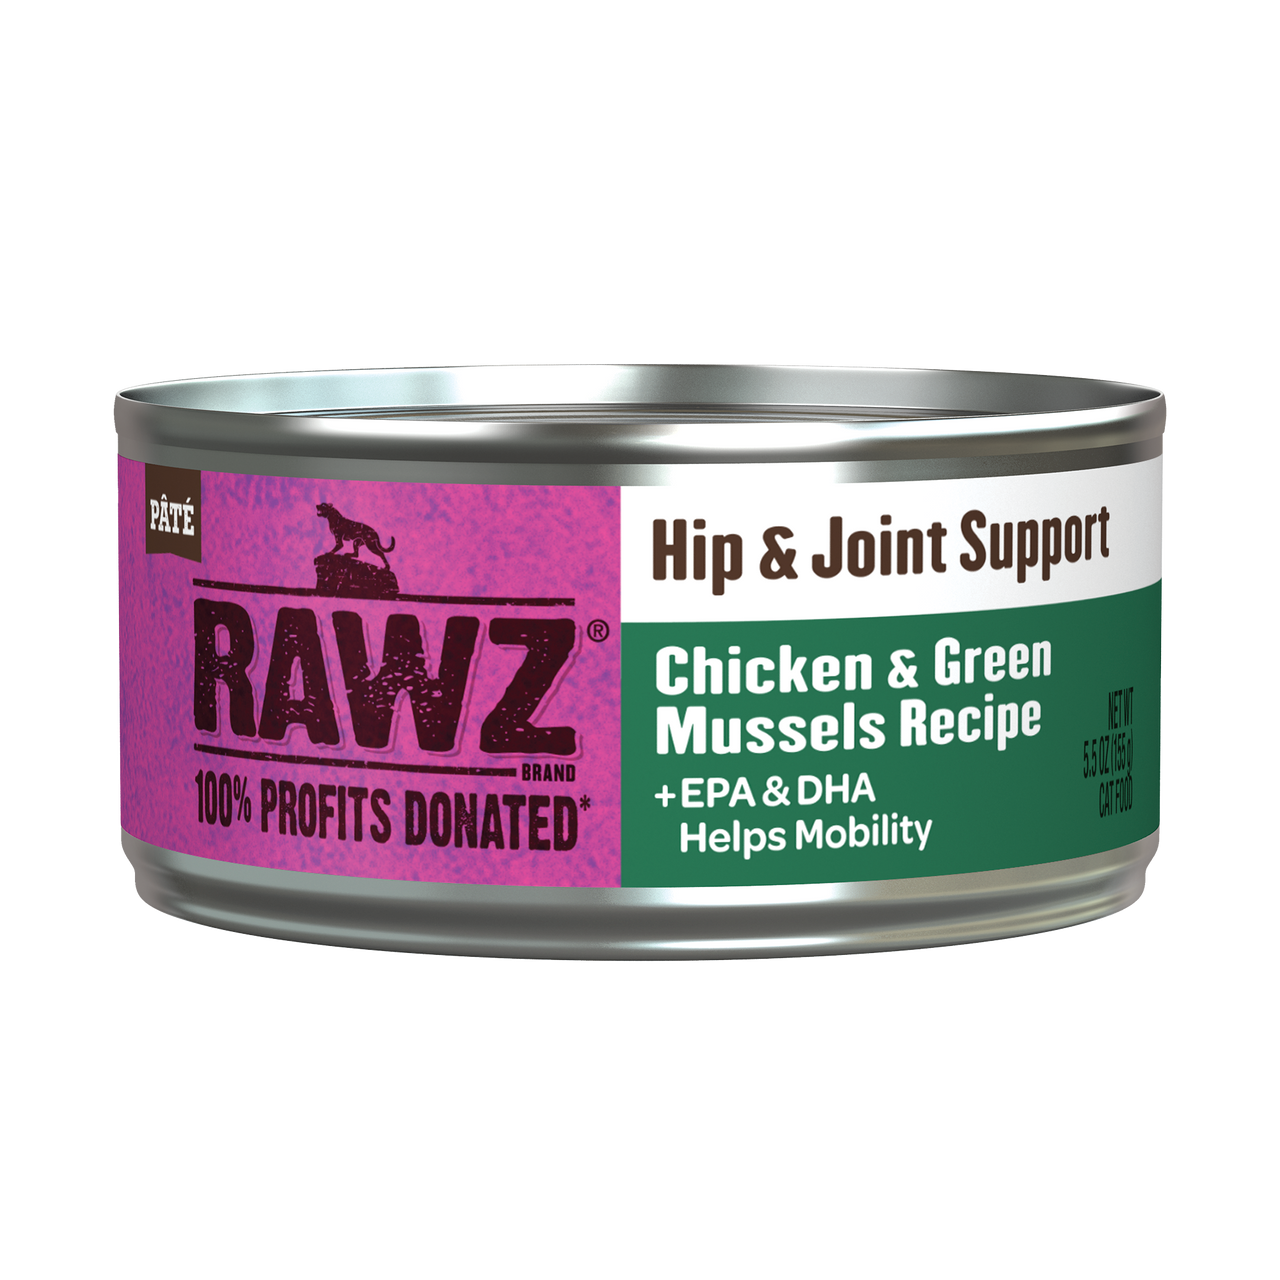 Rawz Hip & Joint Chicken & Green Mussels Cat Canned 5.5oz